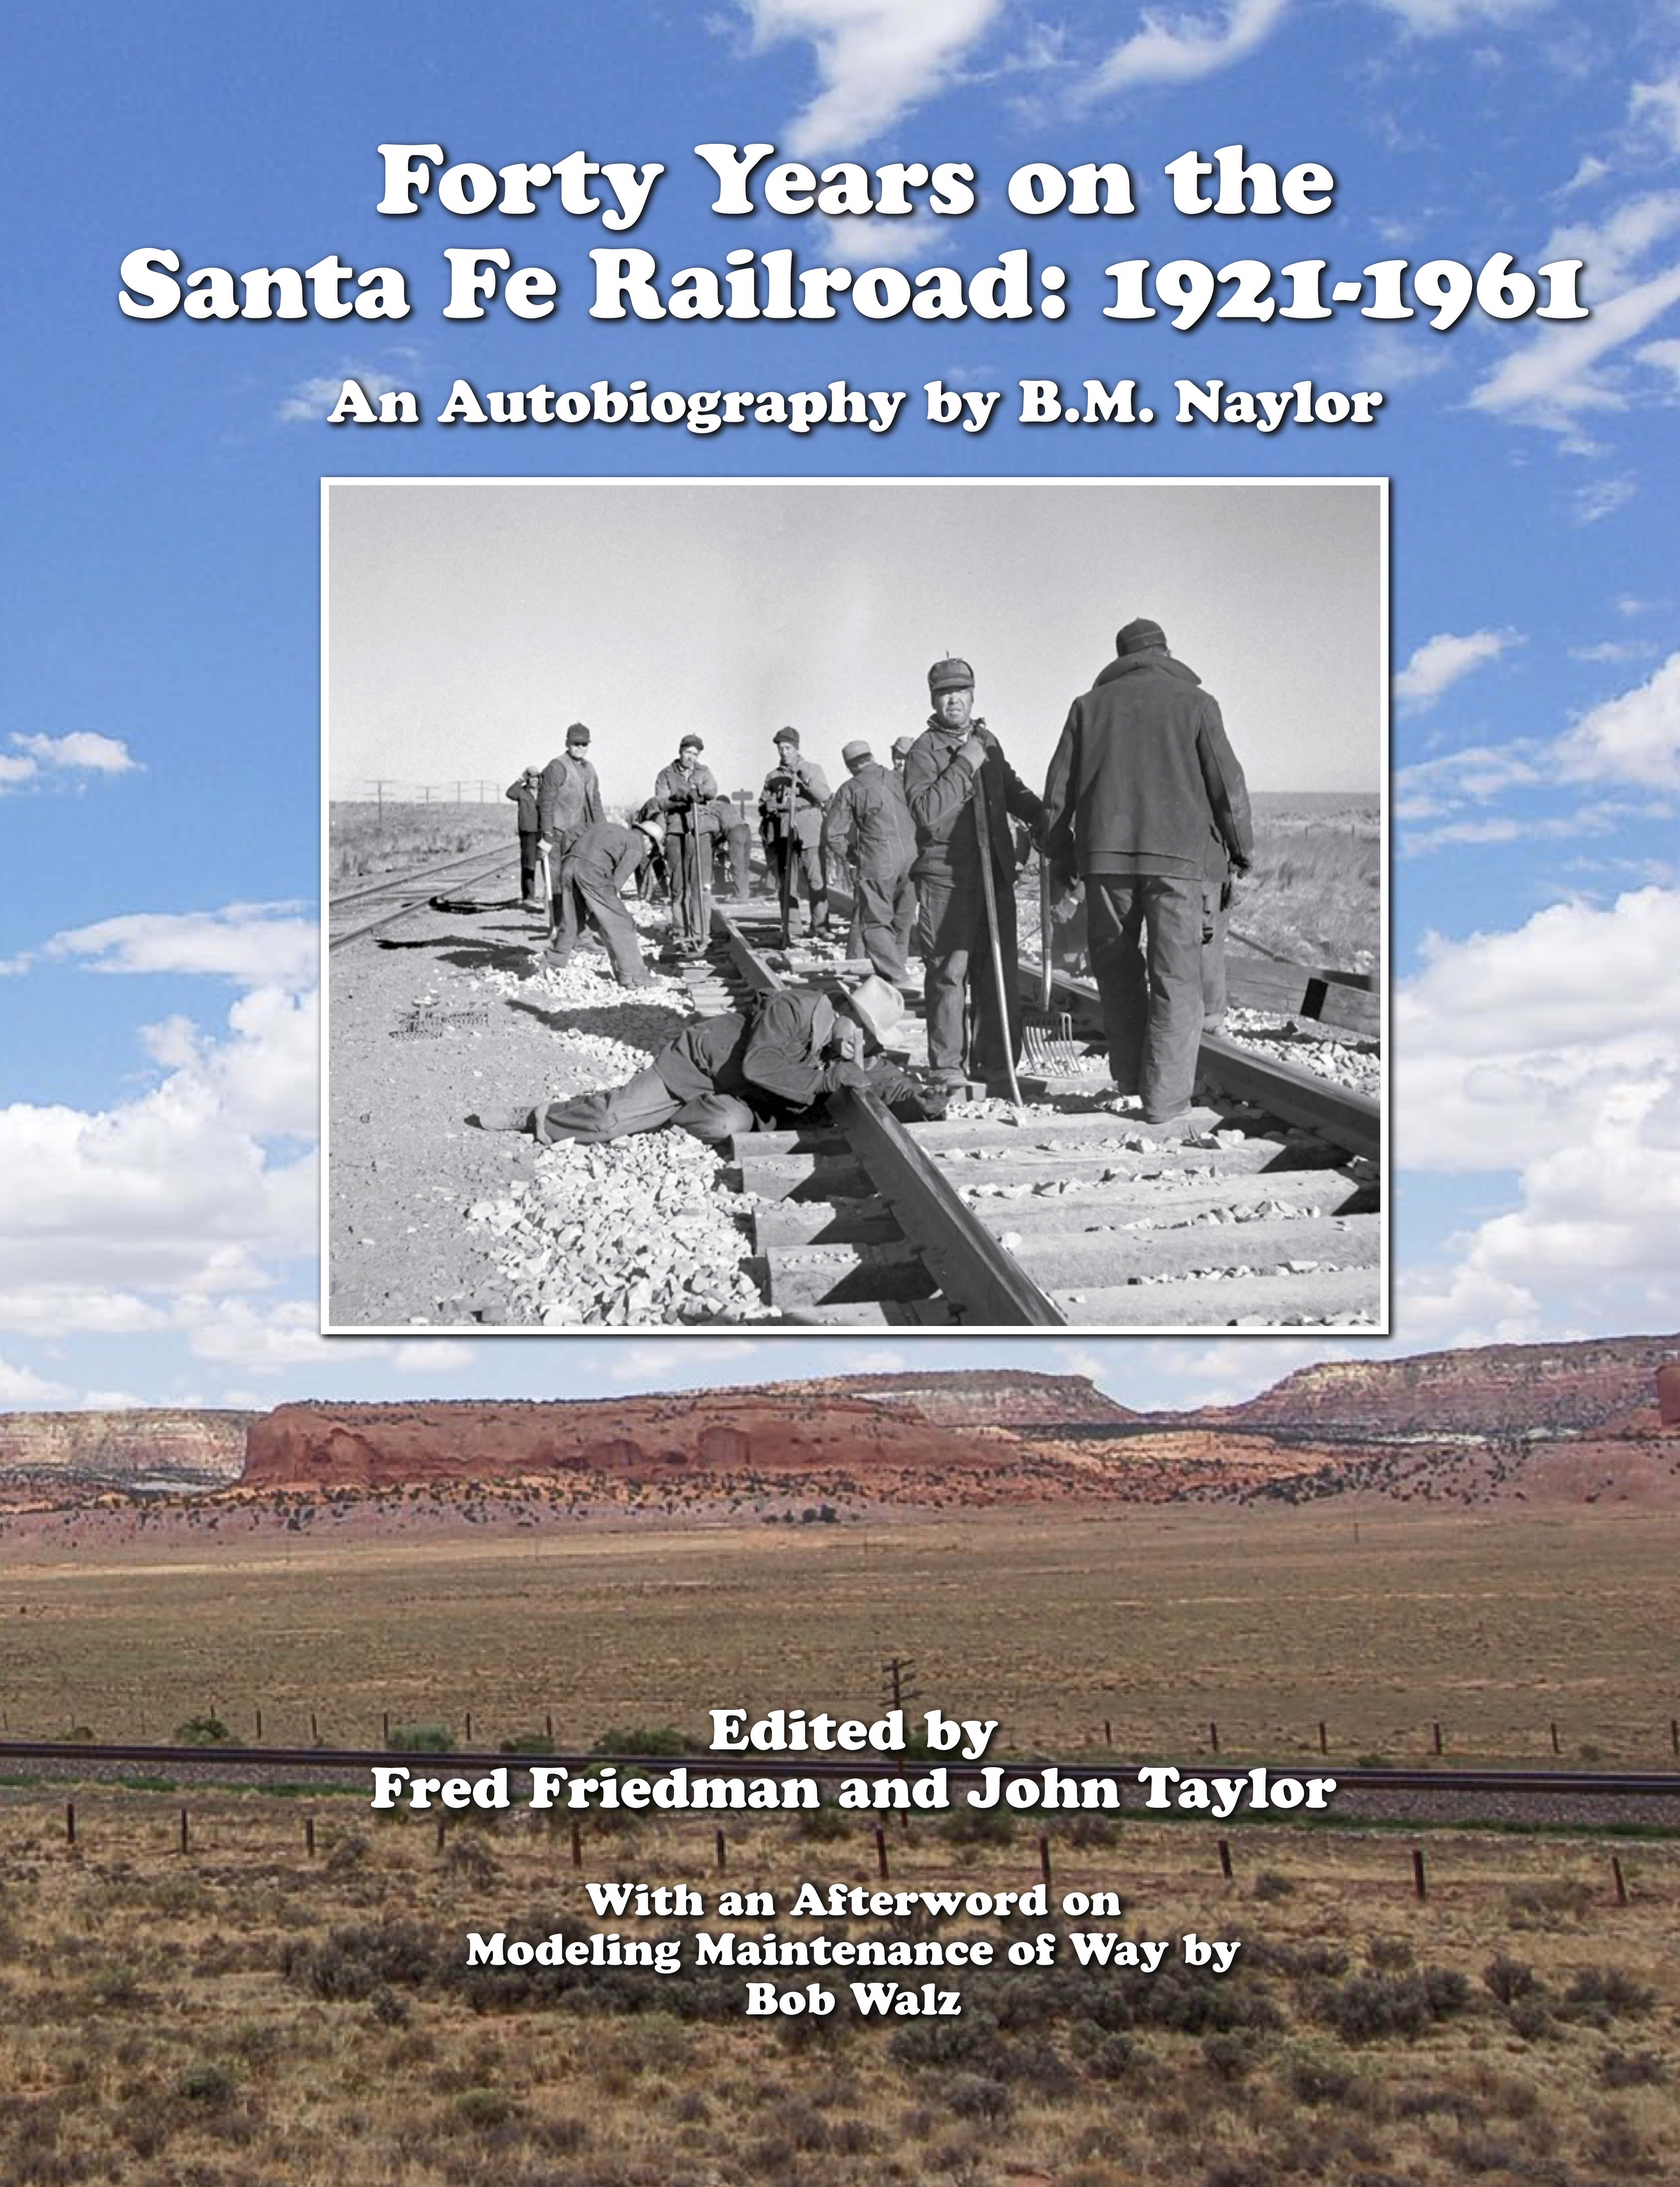 Forty Years on the Santa Fe Railroad: 1921-1961. By B.M. Naylor